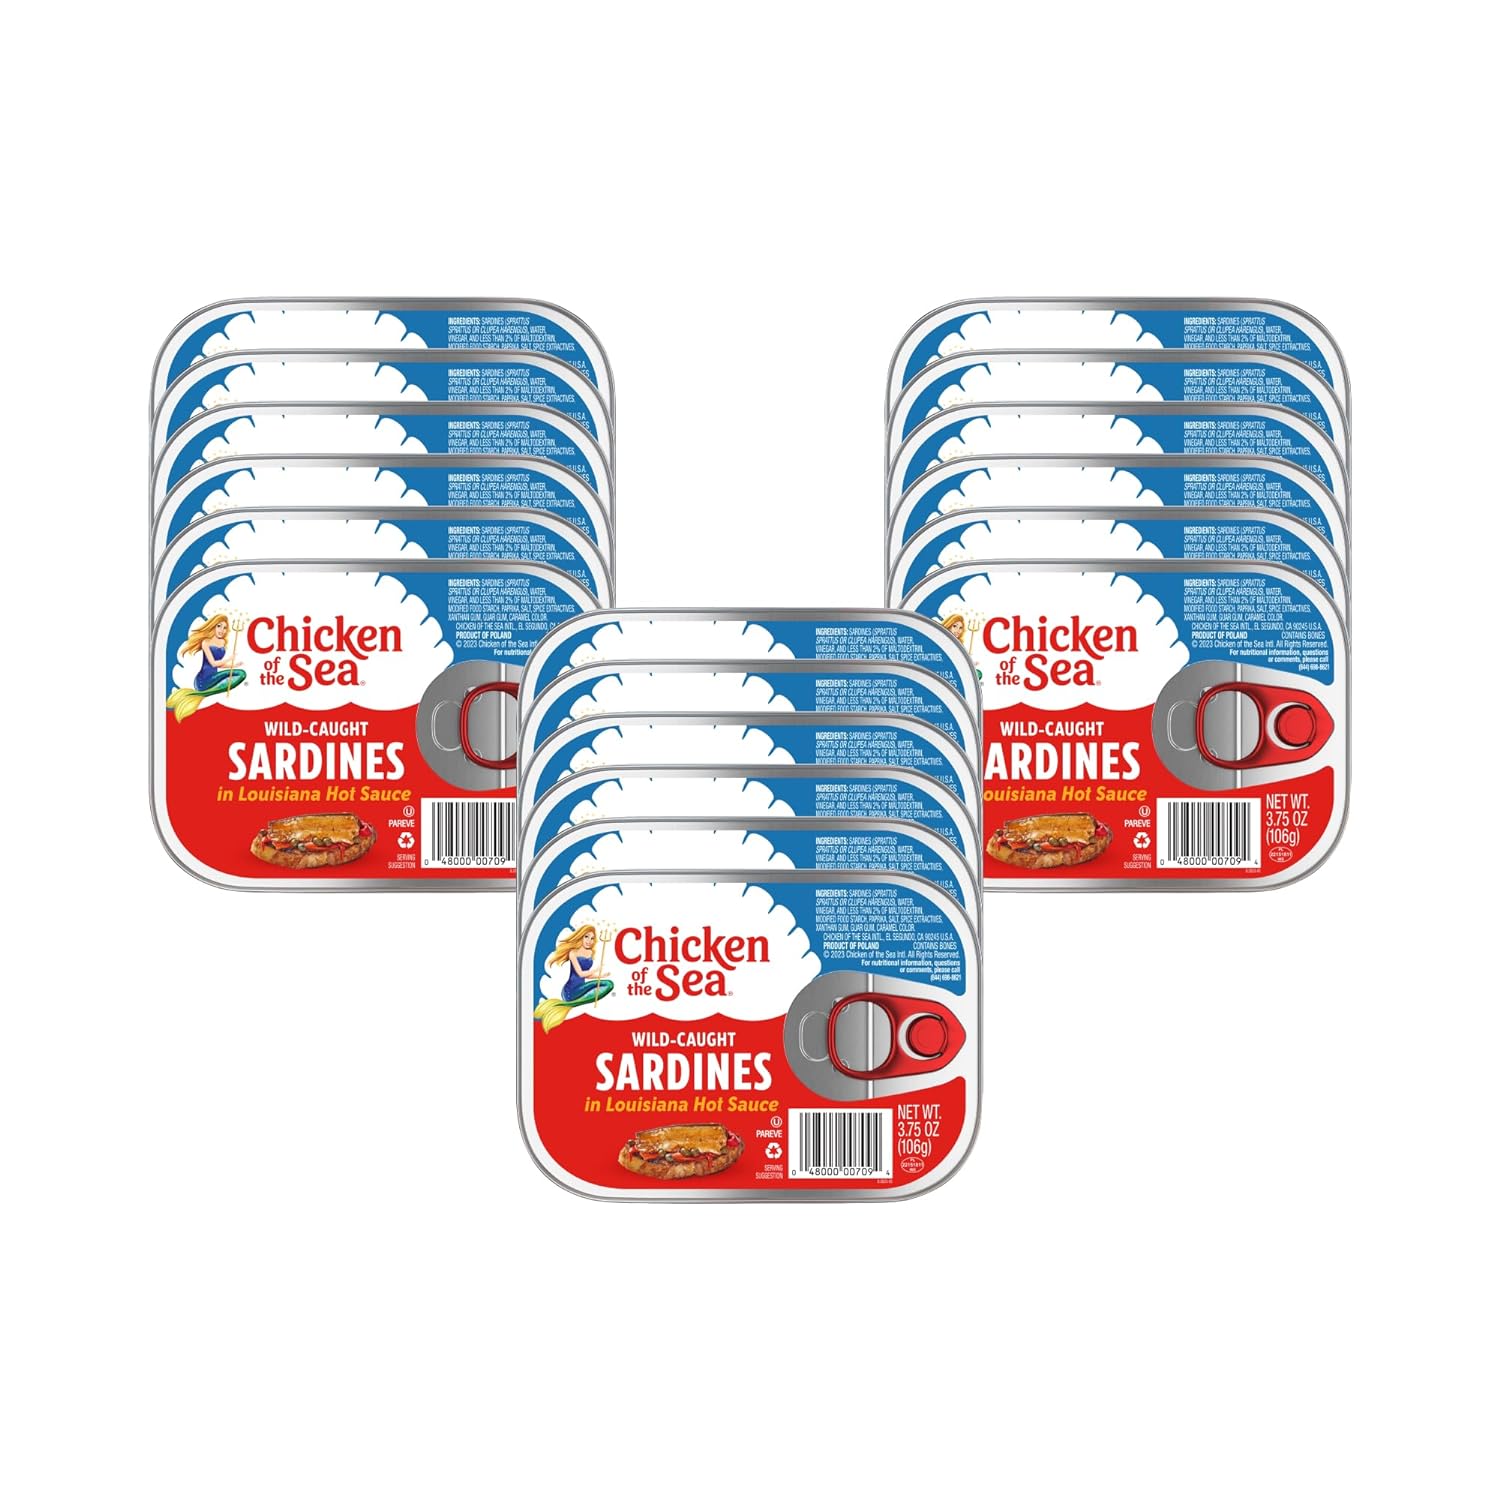 Chicken of the Sea Sardines in Louisiana Hot Sauce, Wild Caught, 3.75 oz. Can (Pack of 18) Packaging May Vary